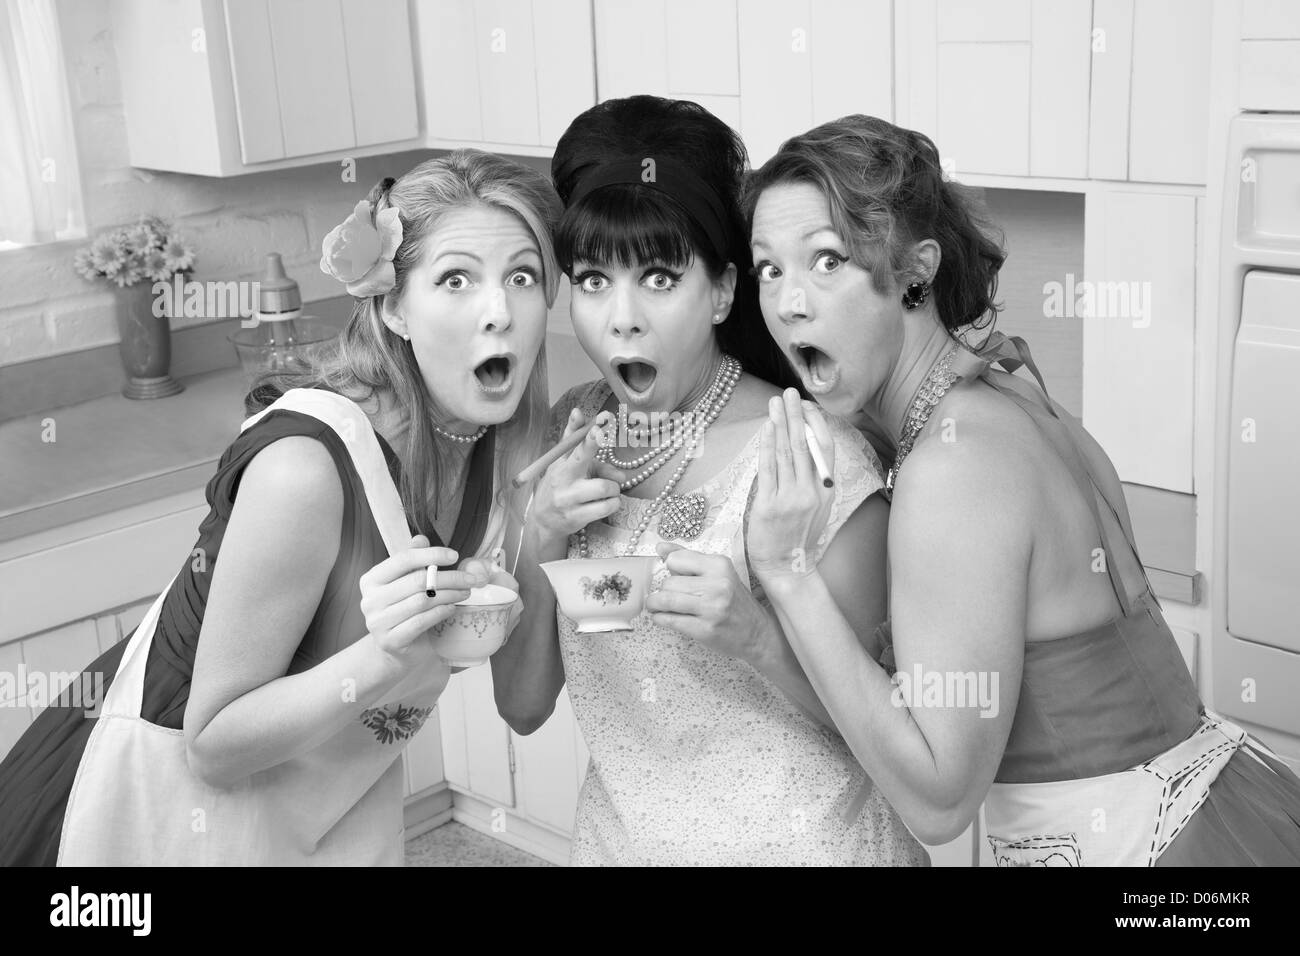 Three surprised middle-aged 1950s retro-style women with cigarettes and tea Stock Photo